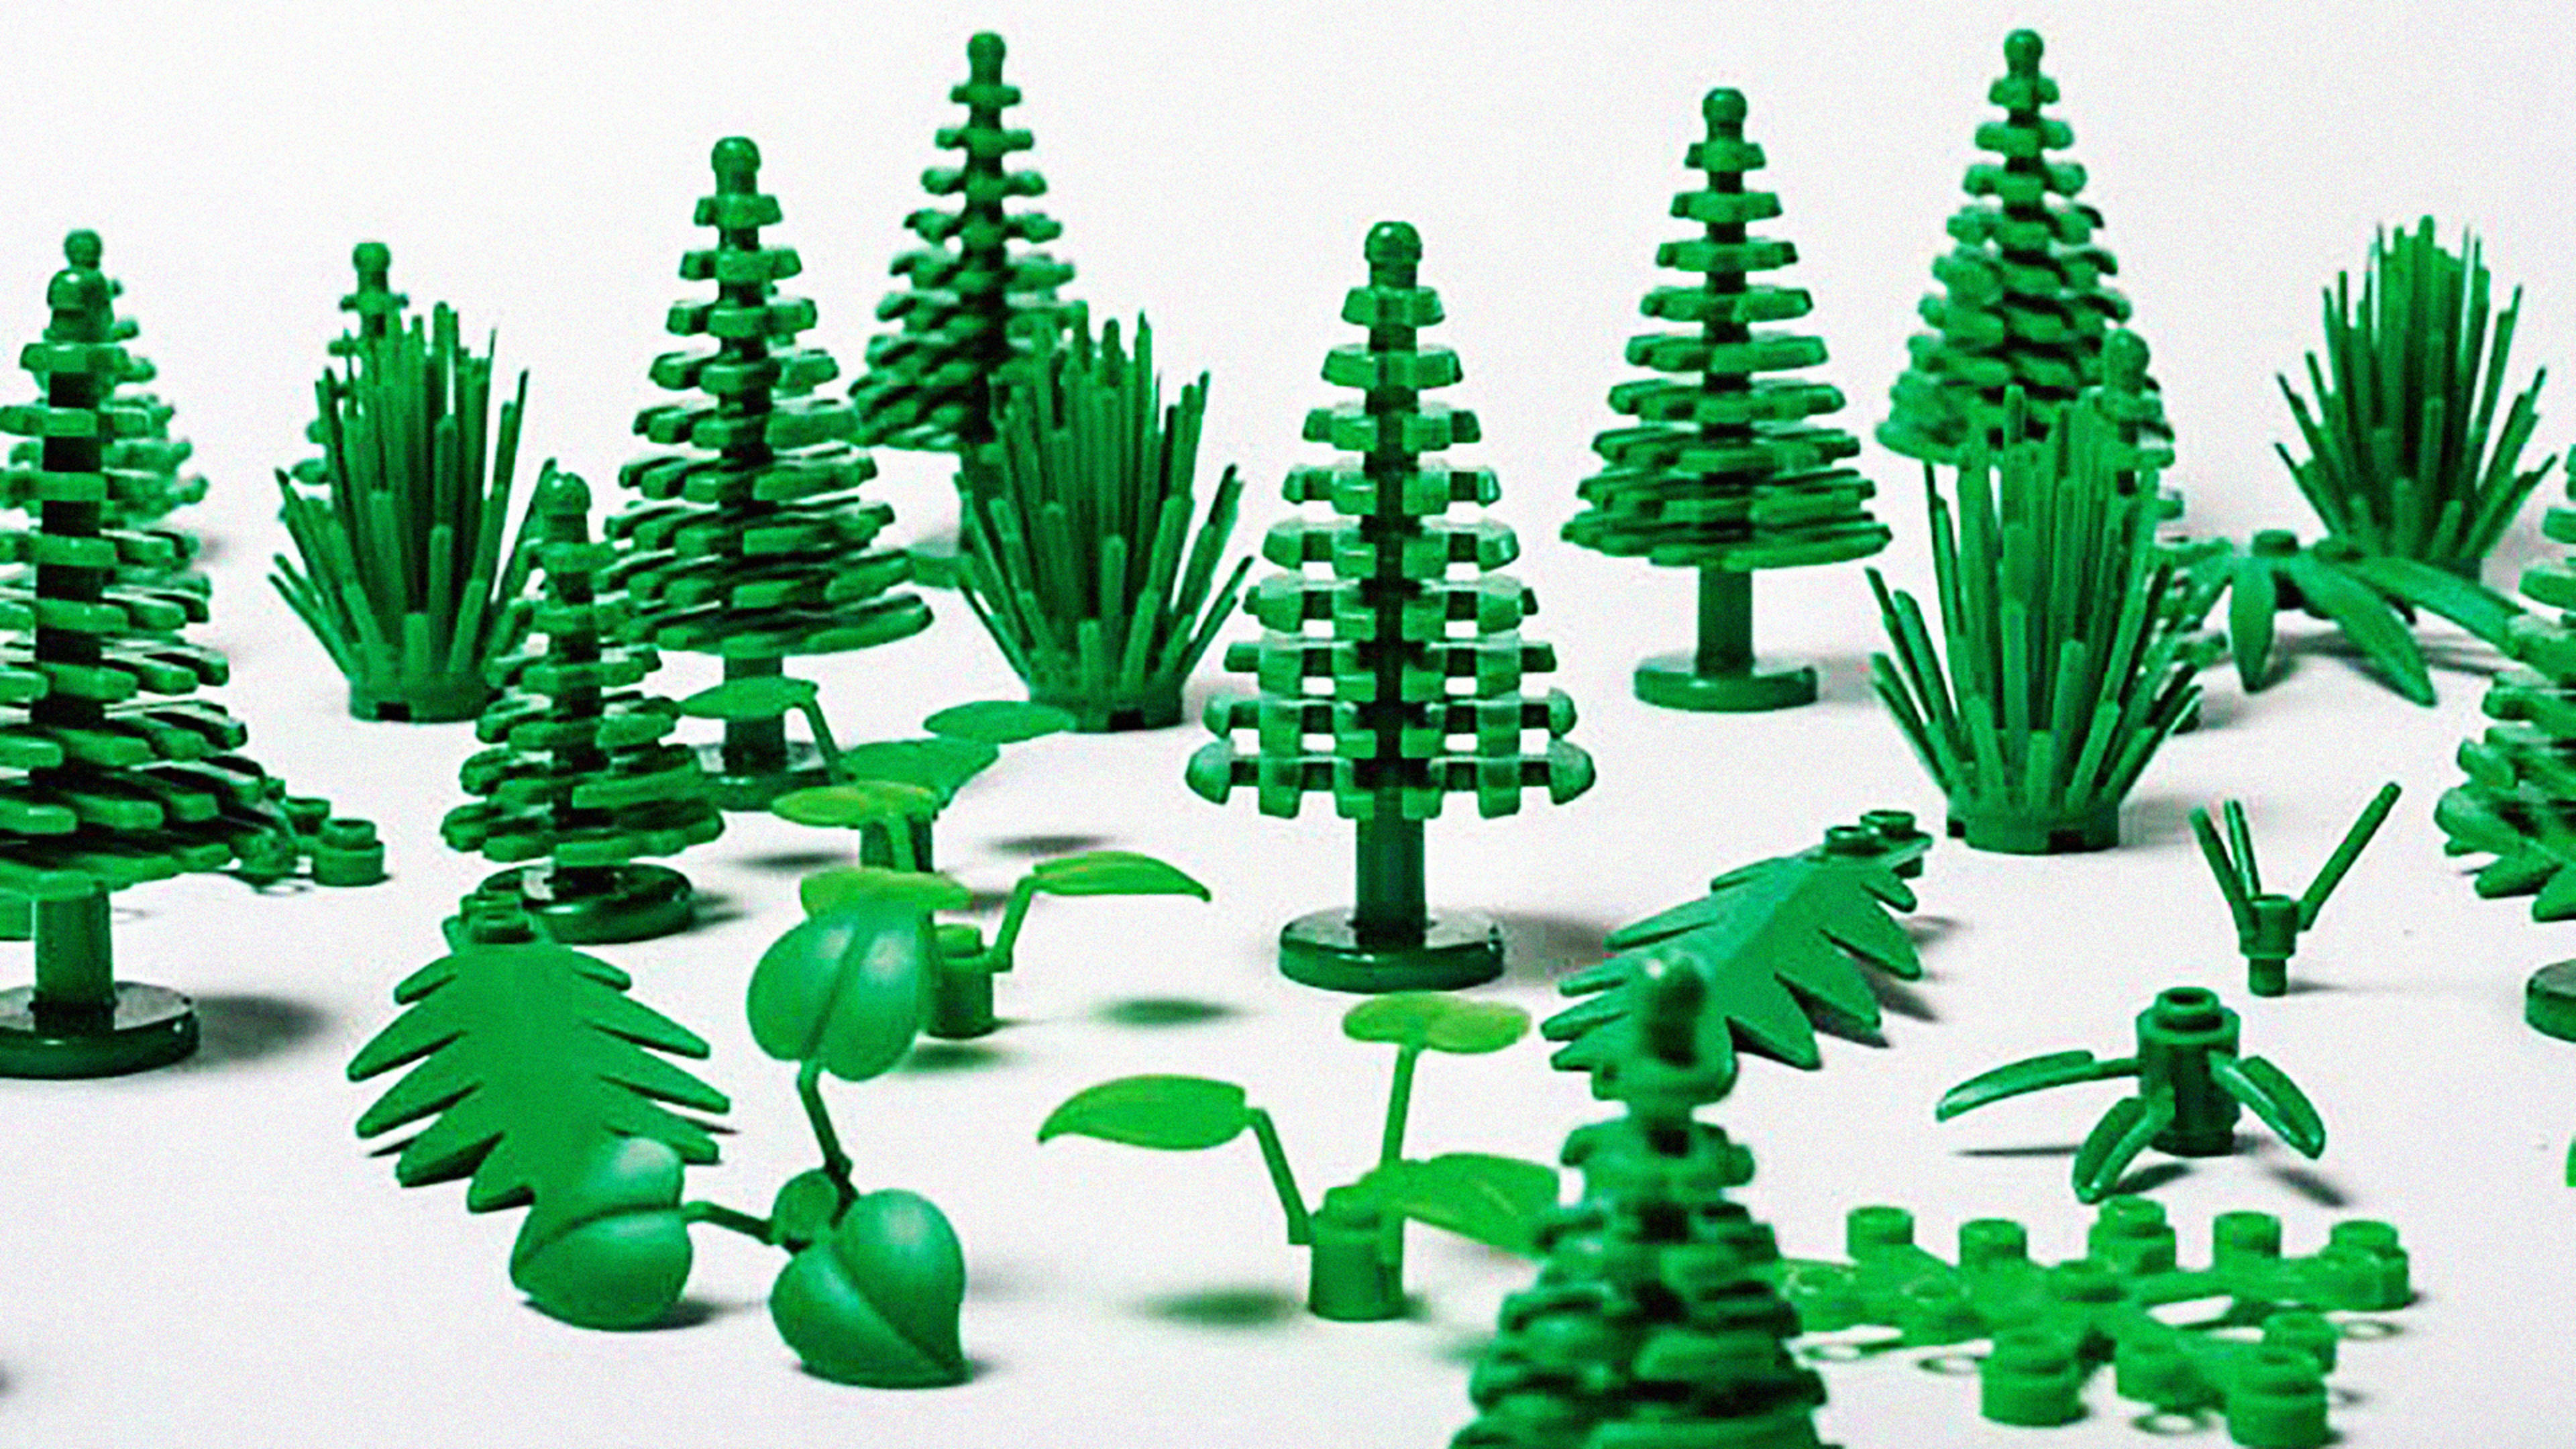 Here’s why Lego is swapping plastic for plants